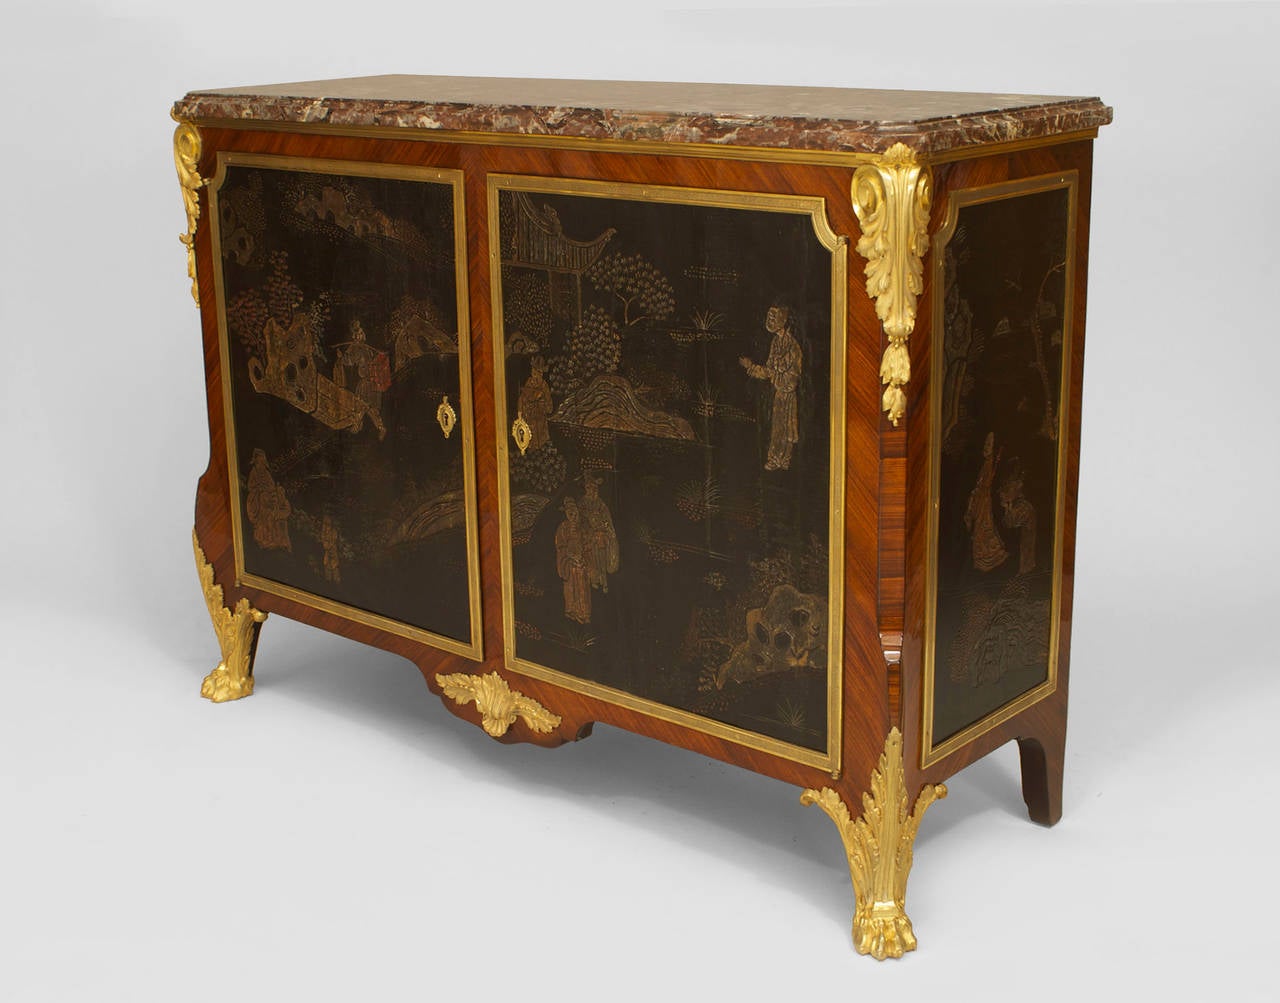 French Louis XVI style (19th Century) transitional style gilt bronze-mounted tulipwood marble top commode with 2 Chinese coromandel lacquer side panels & 2 front doors. (signed: DECOUR)
